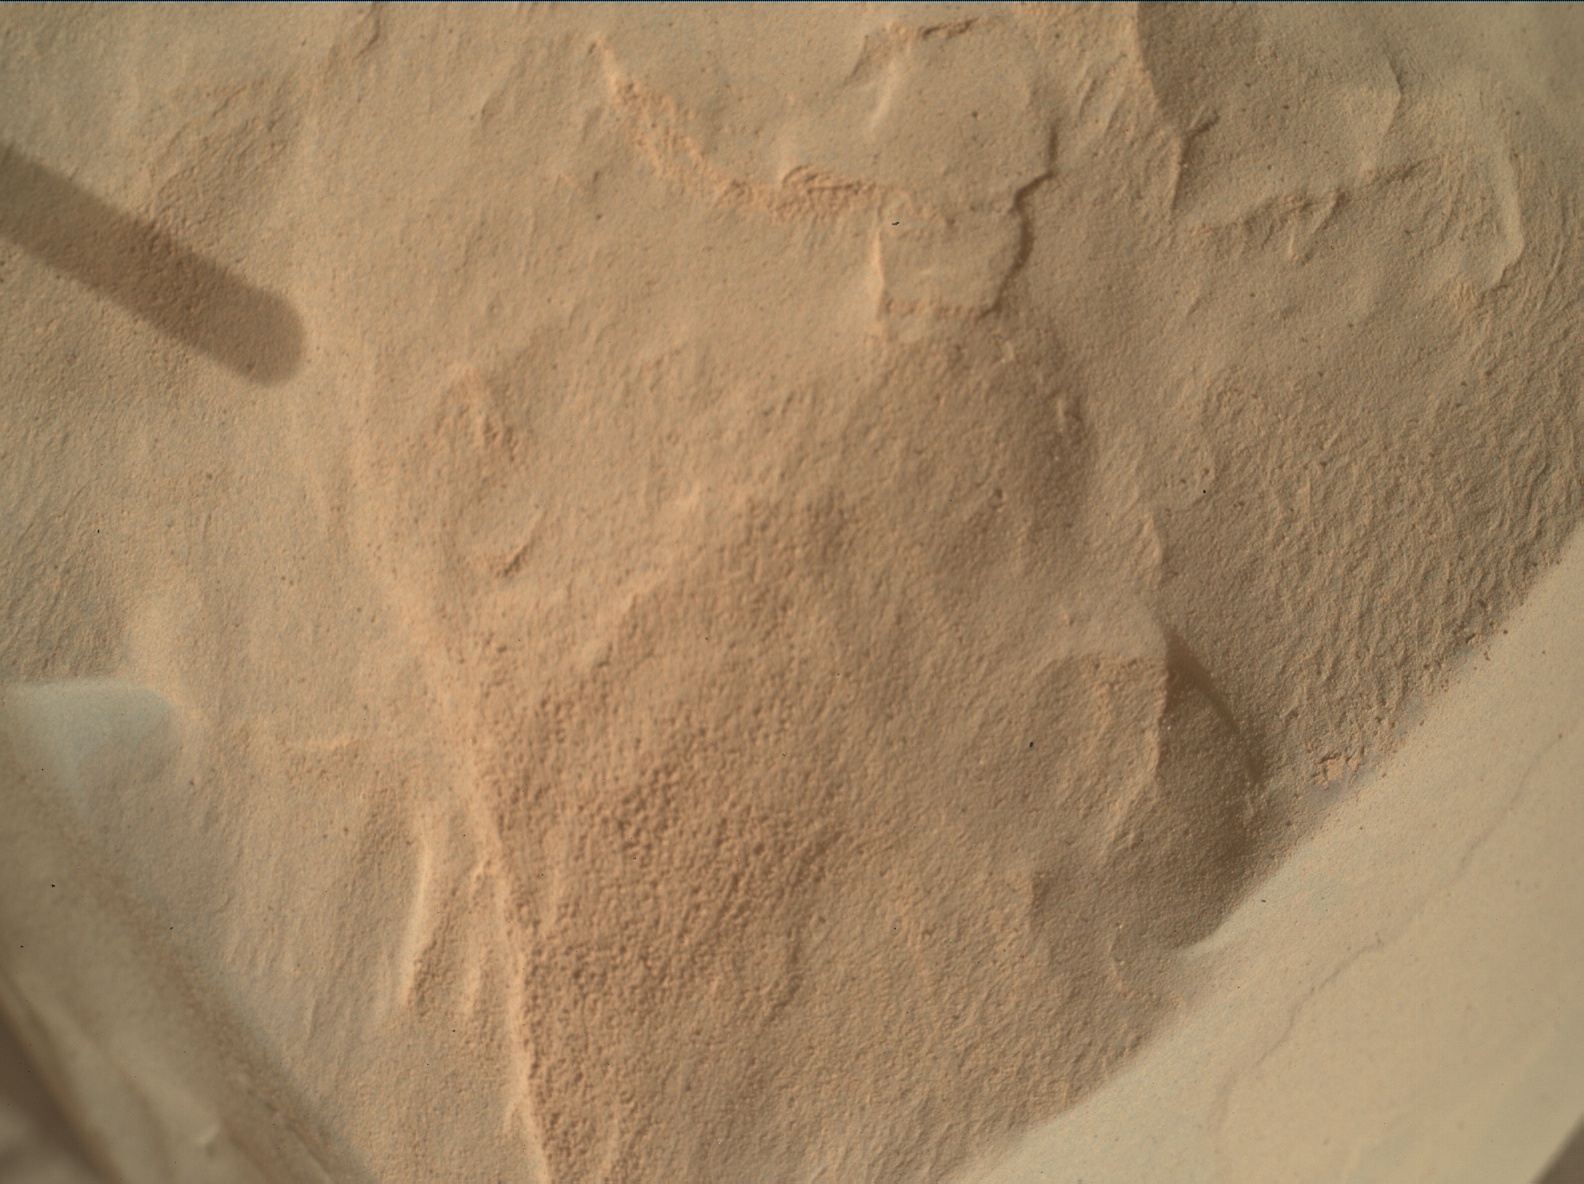 Nasa's Mars rover Curiosity acquired this image using its Mars Hand Lens Imager (MAHLI) on Sol 3732